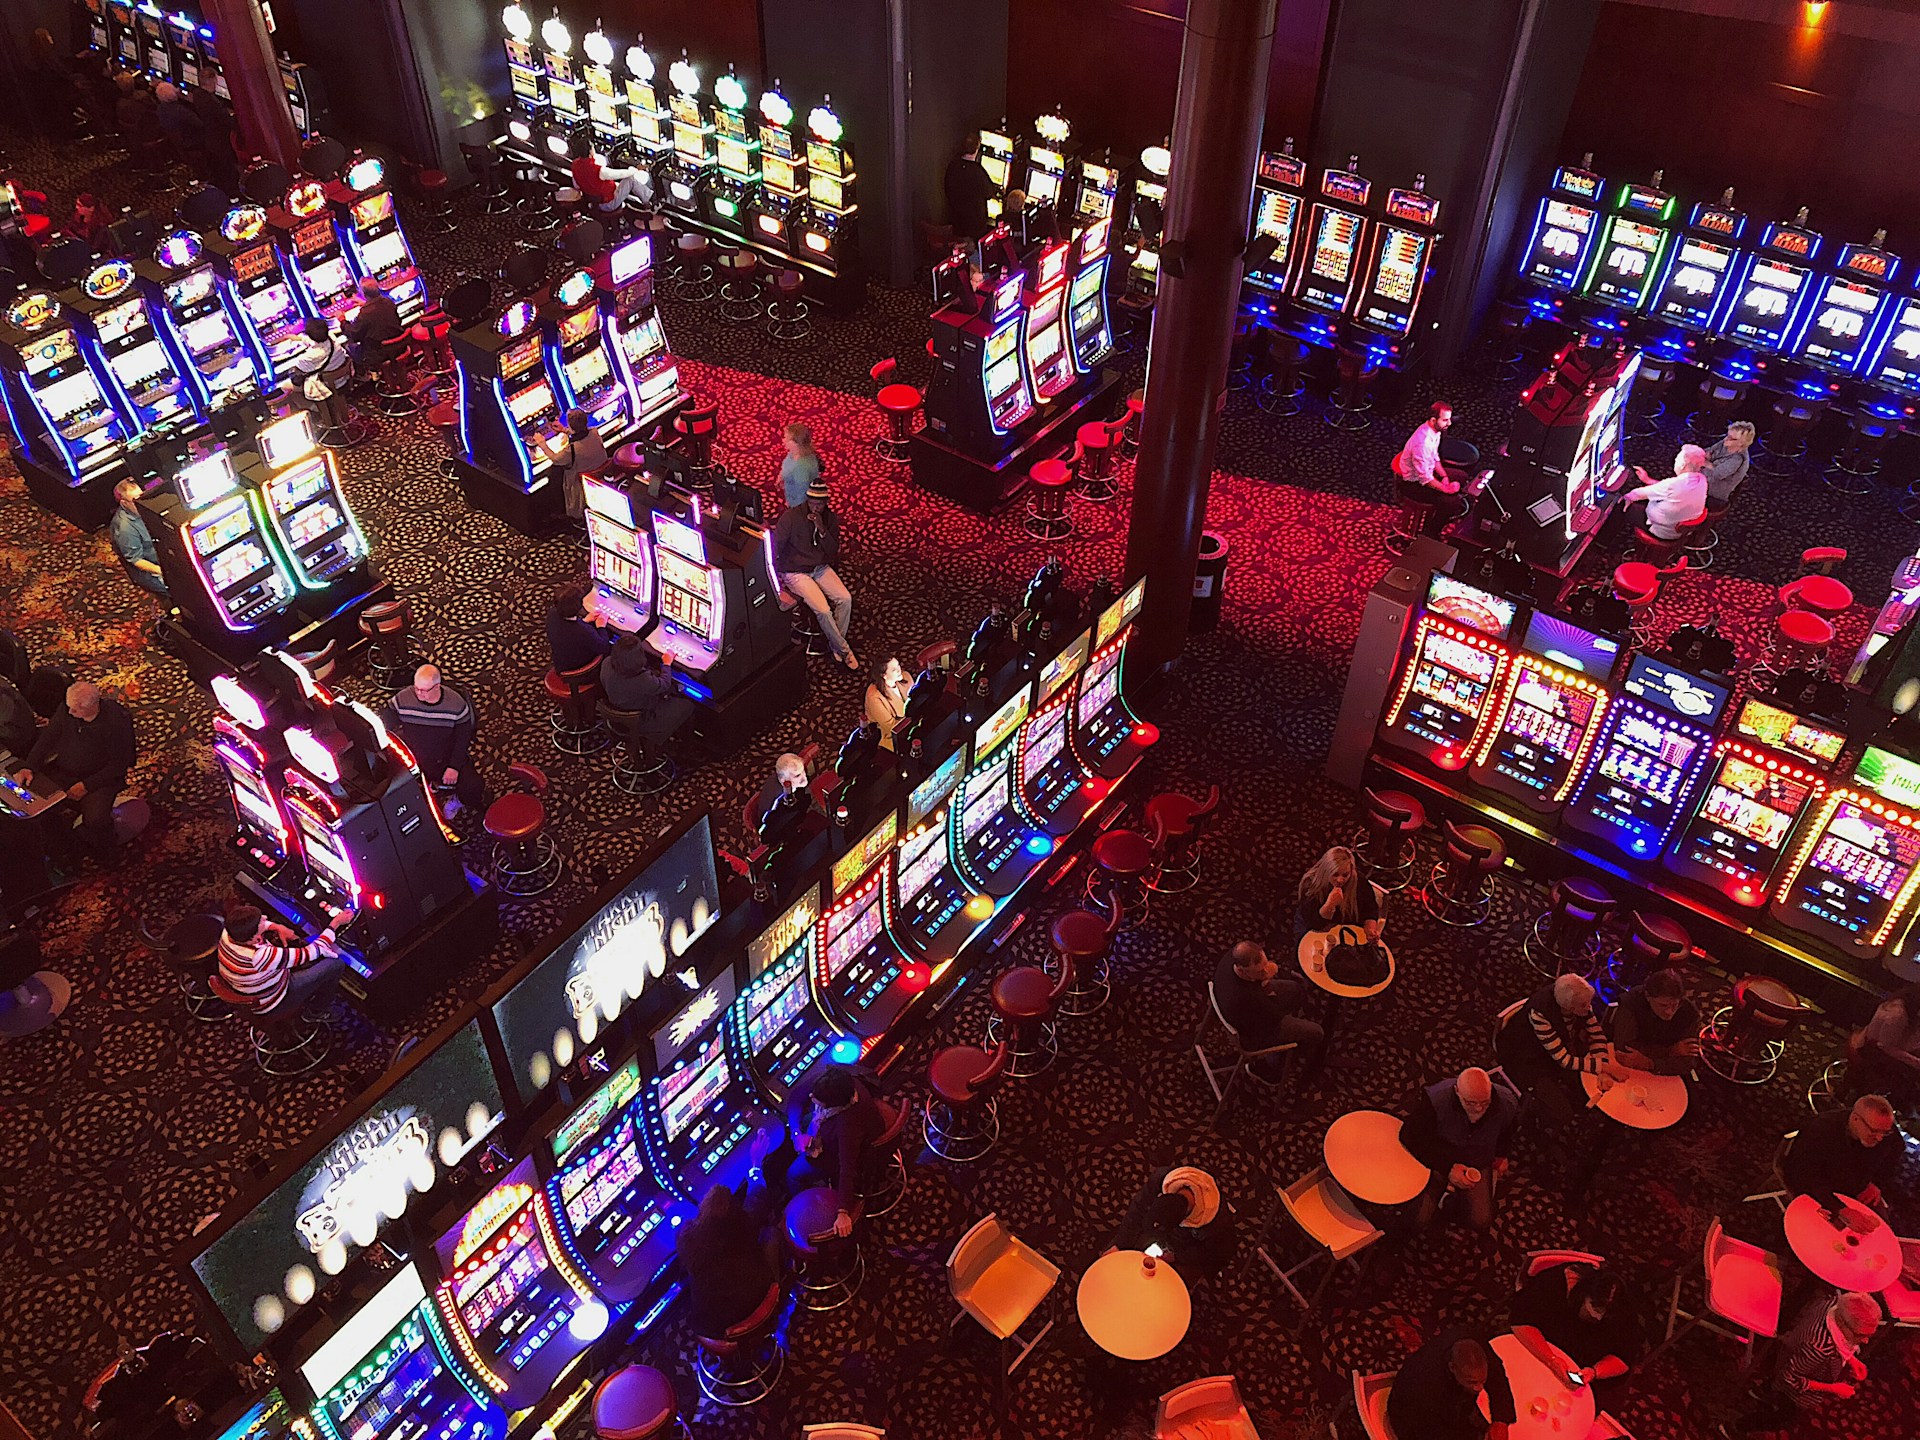 An aerial view of a casino floor with several slot machines